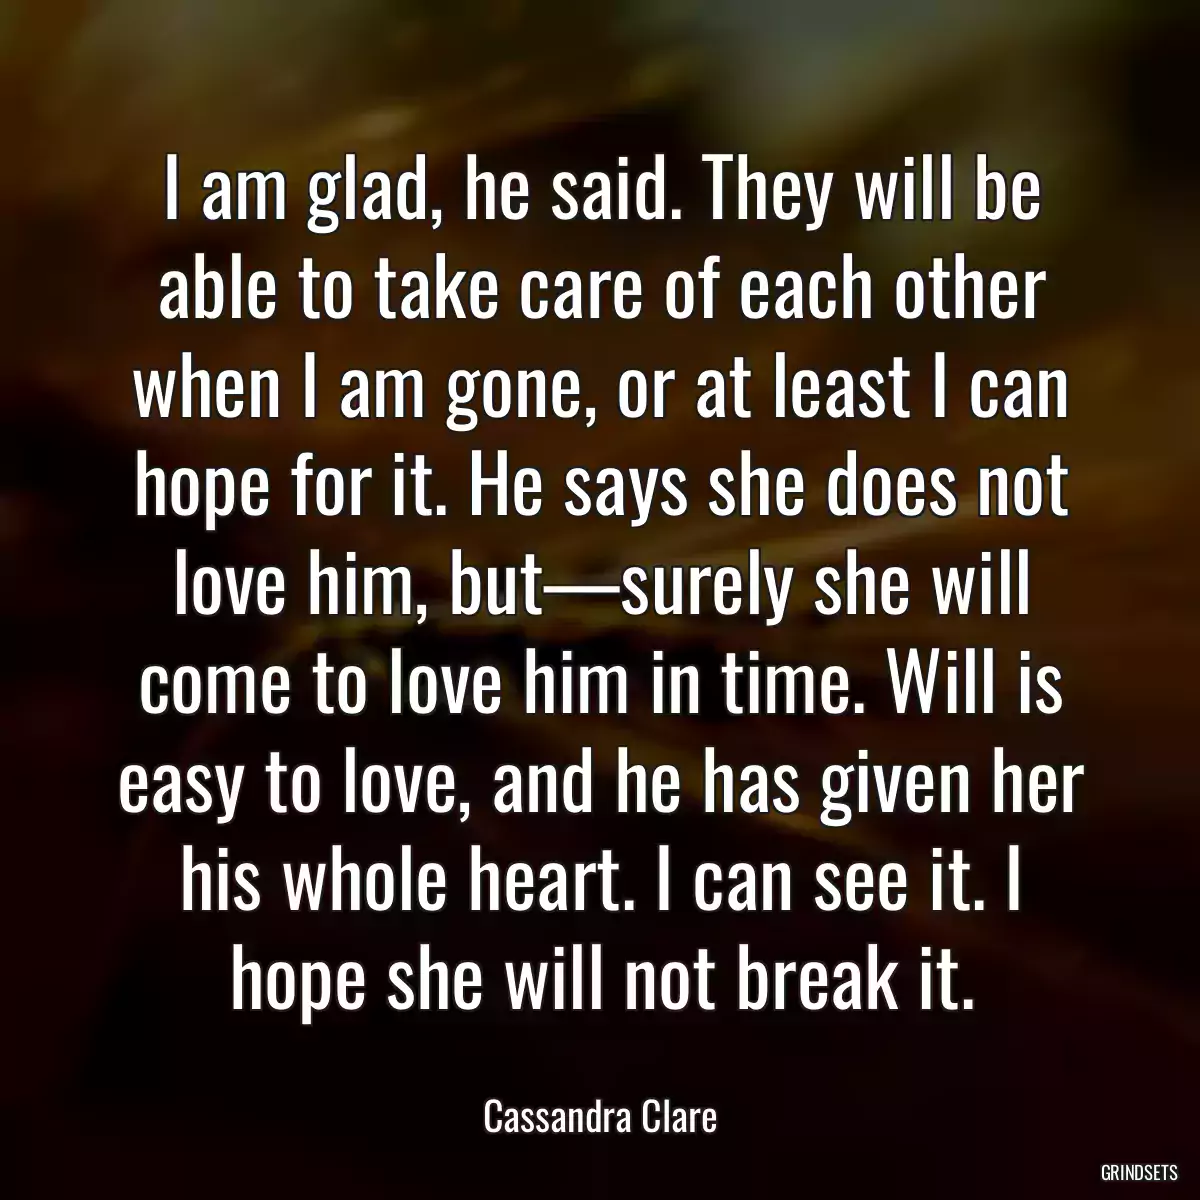 I am glad, he said. They will be able to take care of each other when I am gone, or at least I can hope for it. He says she does not love him, but—surely she will come to love him in time. Will is easy to love, and he has given her his whole heart. I can see it. I hope she will not break it.